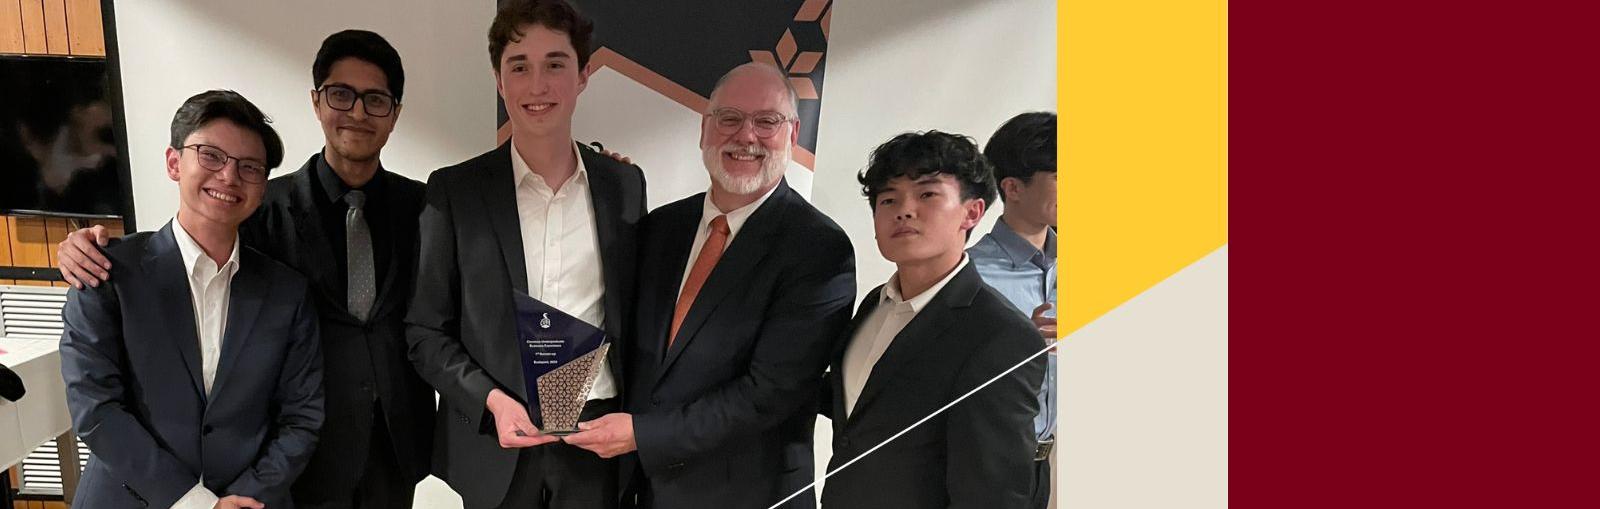 Carlson School students, pictured with faculty advisor Mike Grosso, at a case competition in Budapest, Hungary, after earning 2nd place overall.